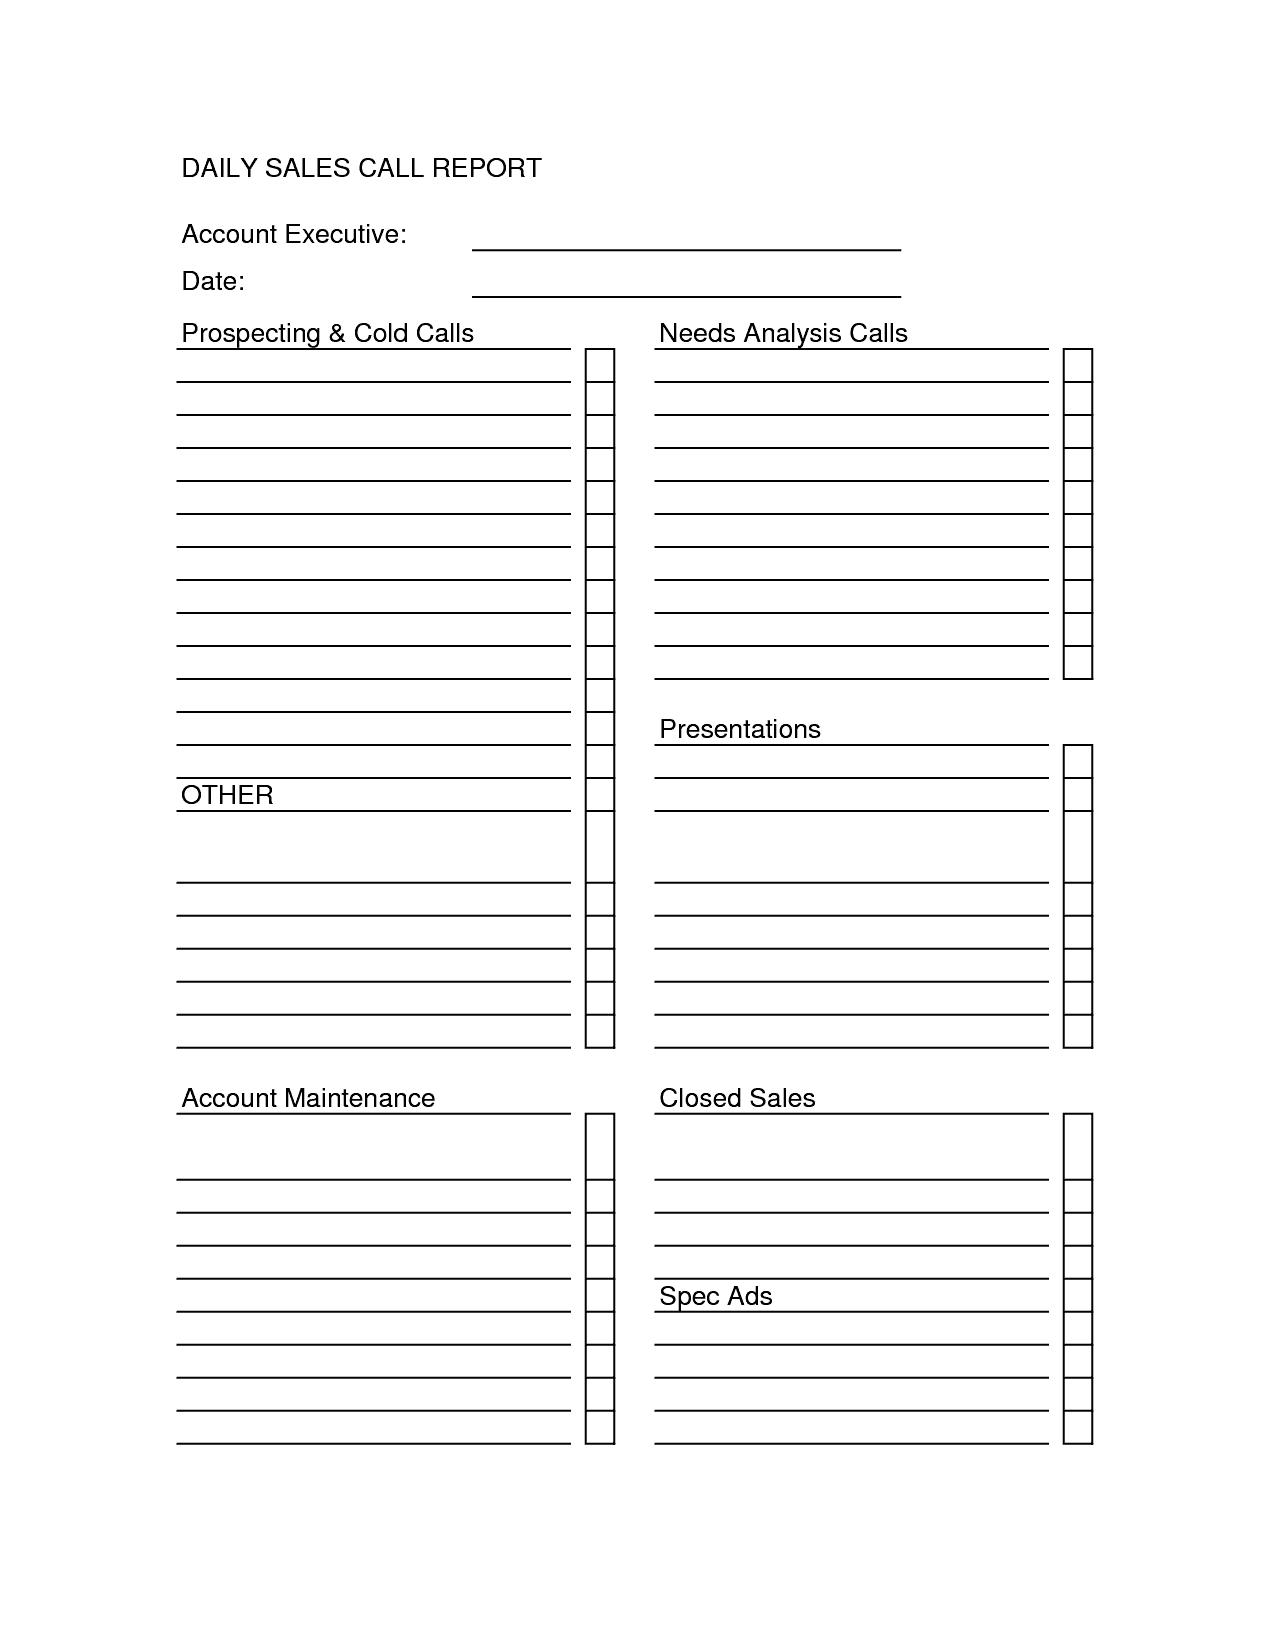 Sales Call Report Templates - Word Excel Fomats With Regard To Sales Call Report Template